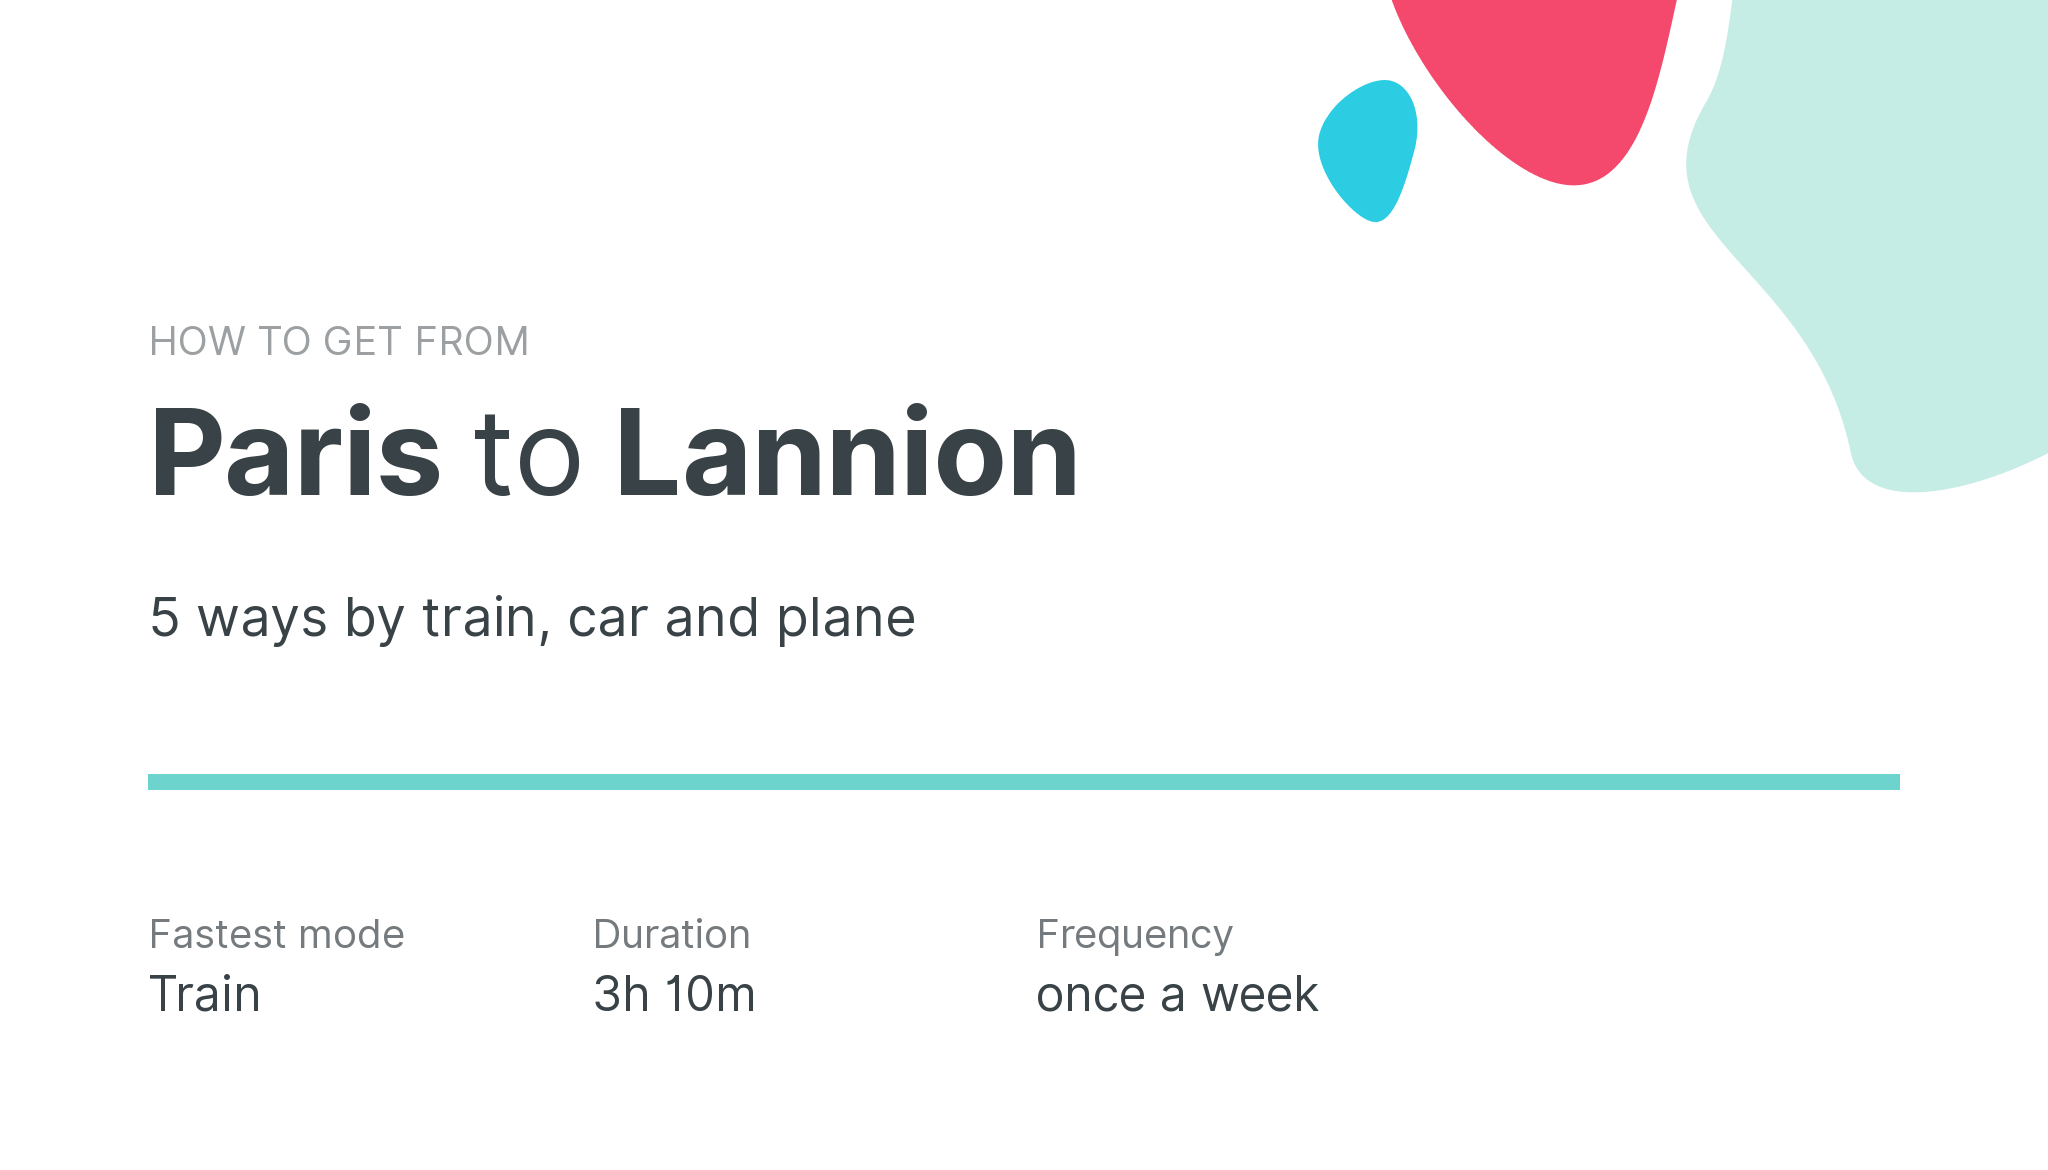 How do I get from Paris to Lannion